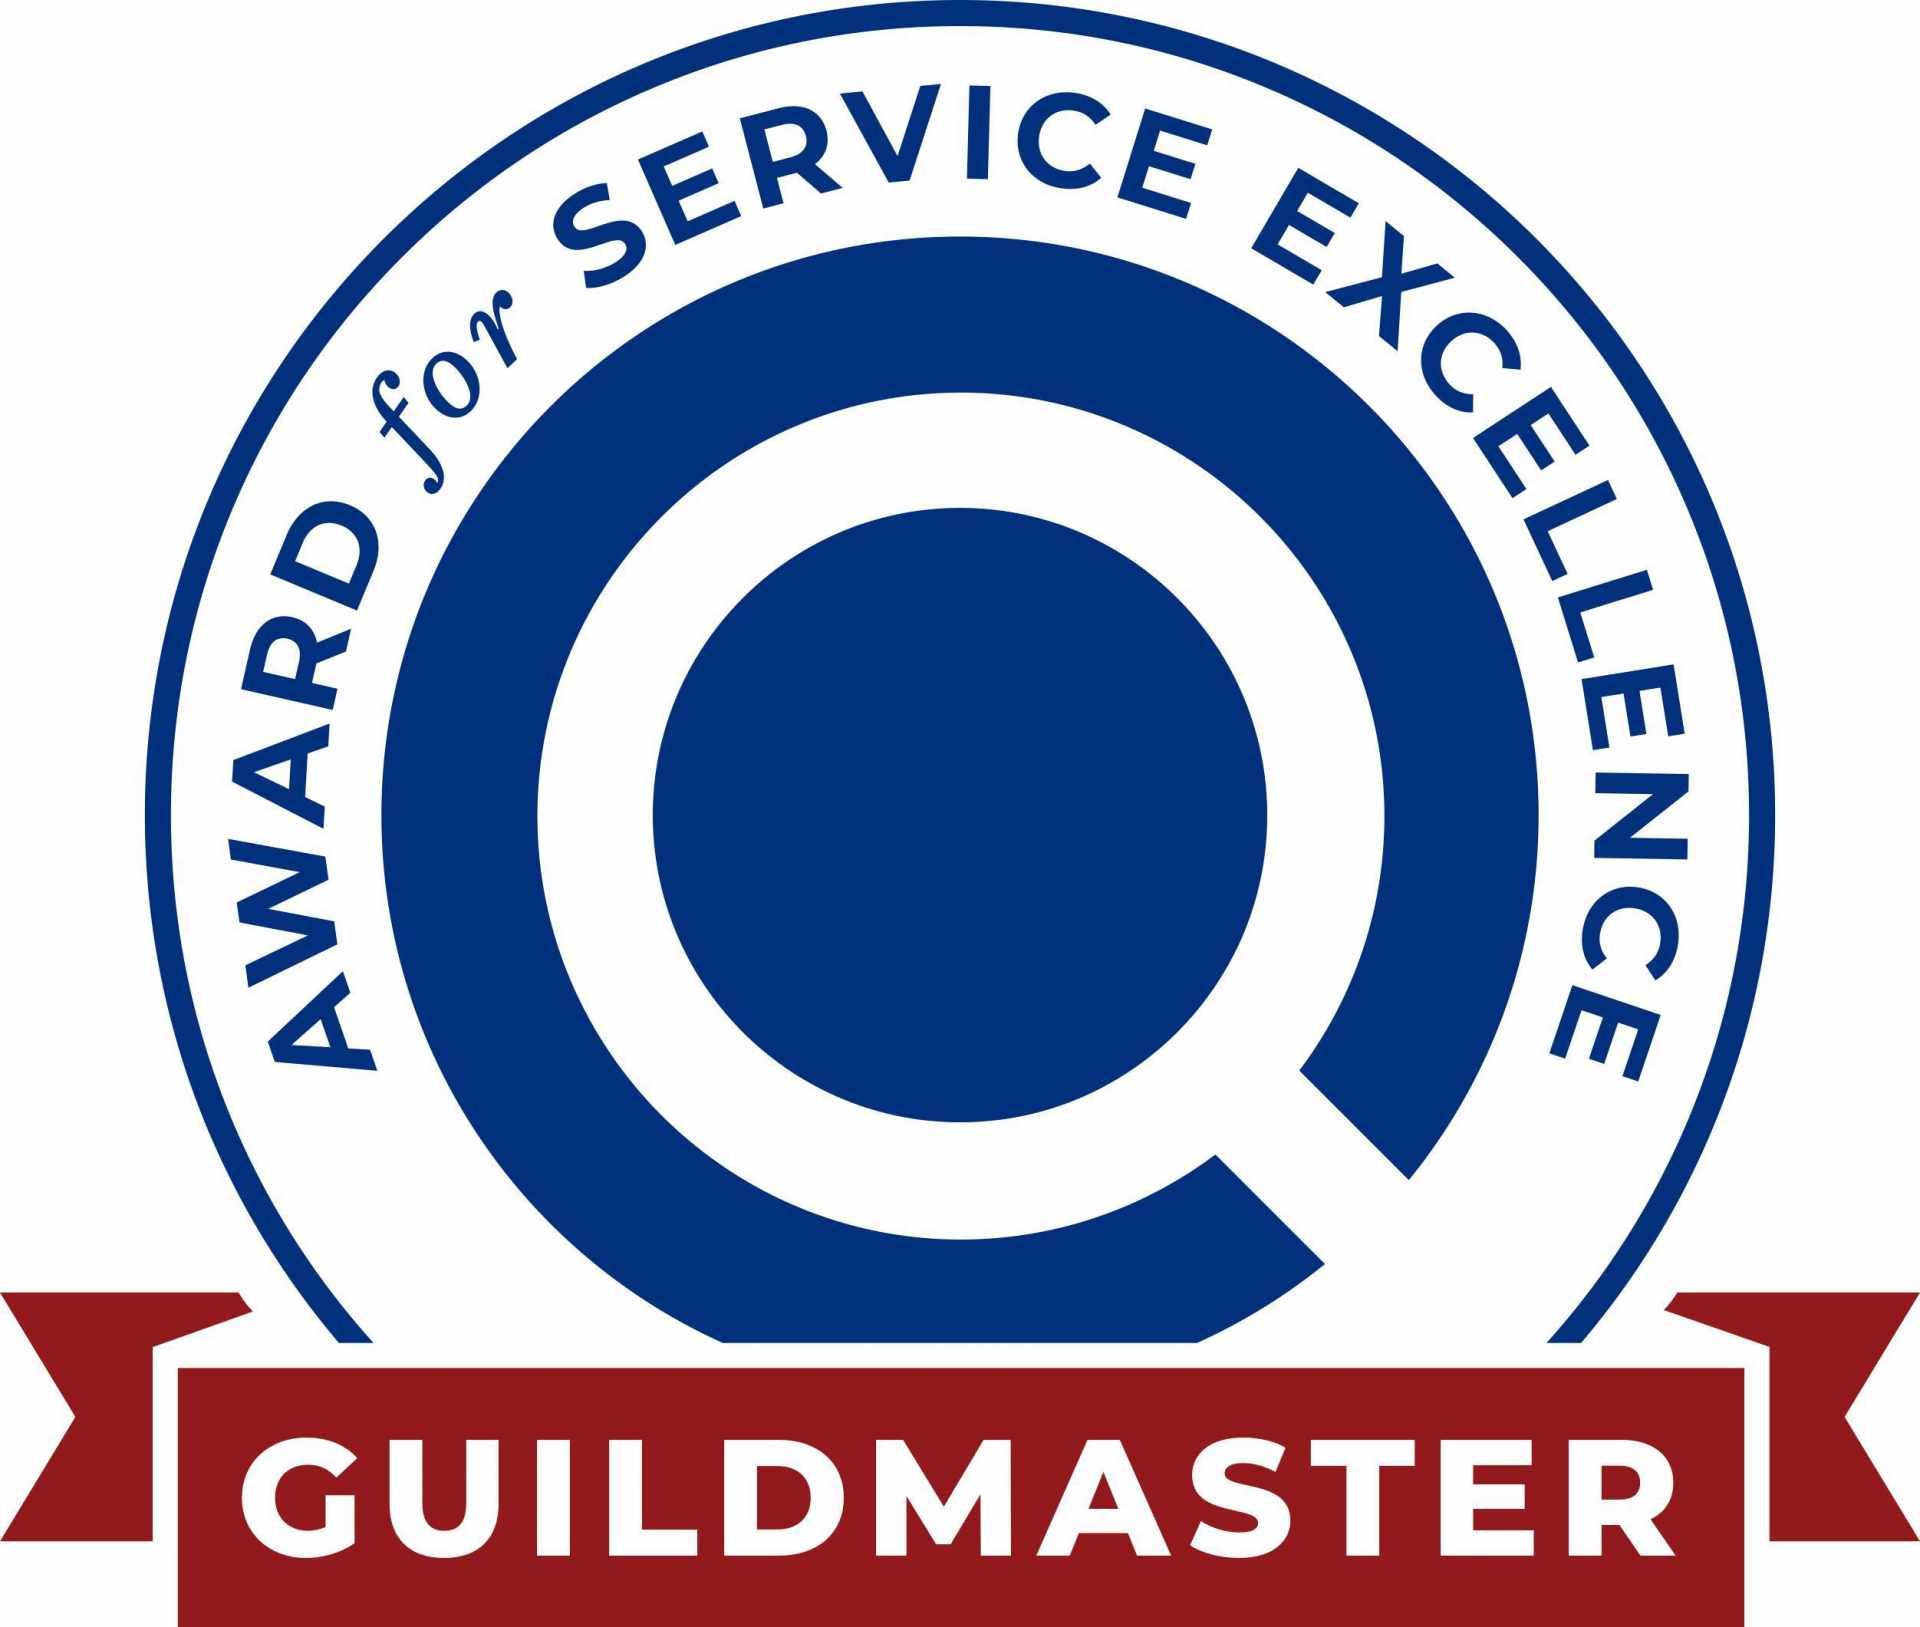 Award for Service Excellence - Guildmaster